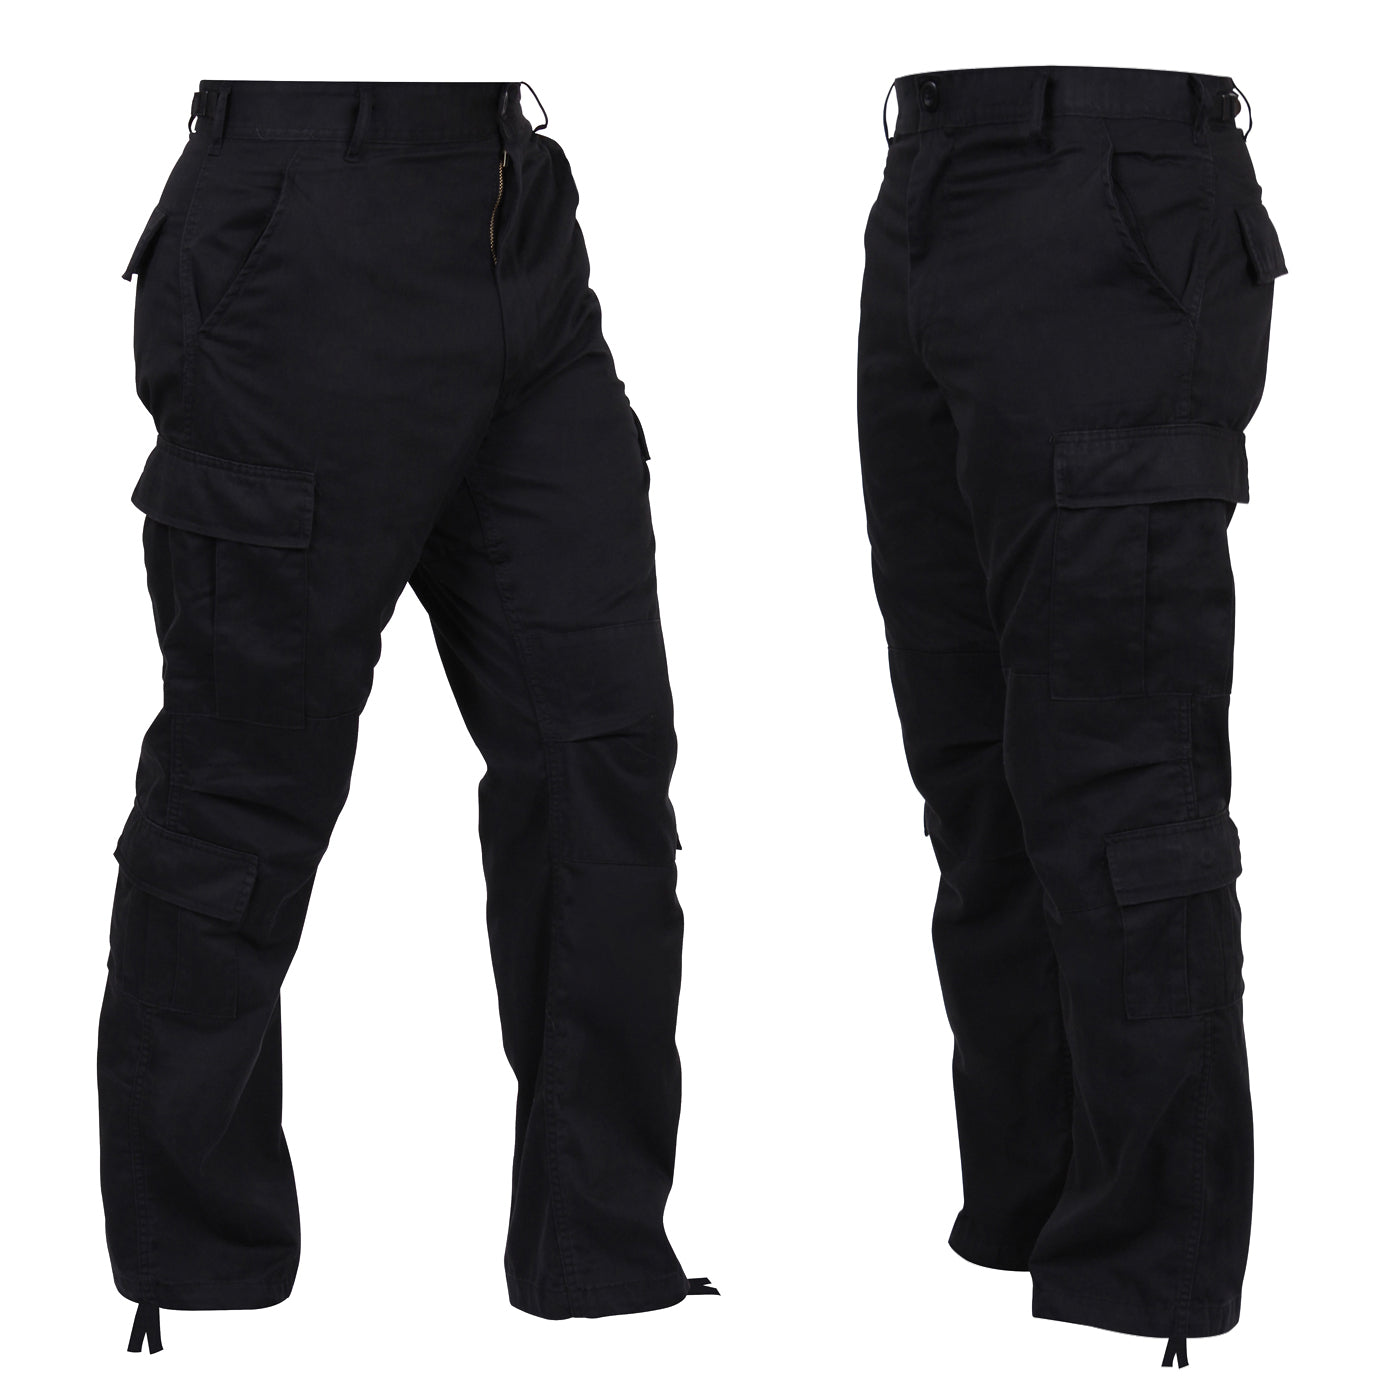 Rothco's Vintage Paratrooper Fatigue Pants in Black – Grunt Force